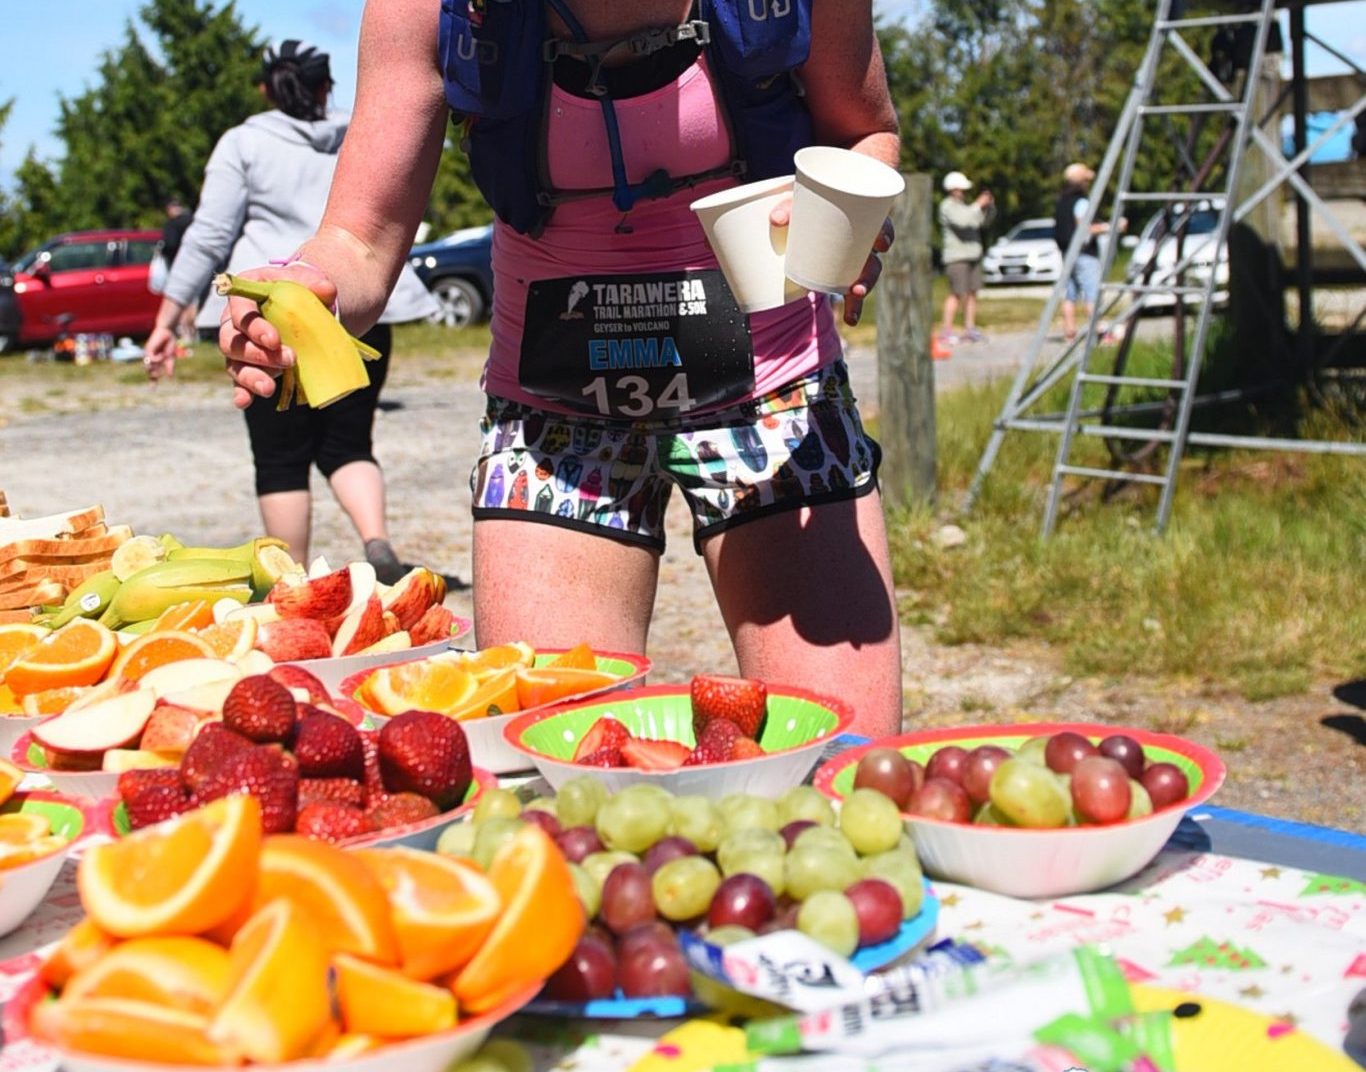 What to eat and drink during a trail running race? 5 tips for planning your race nutrition